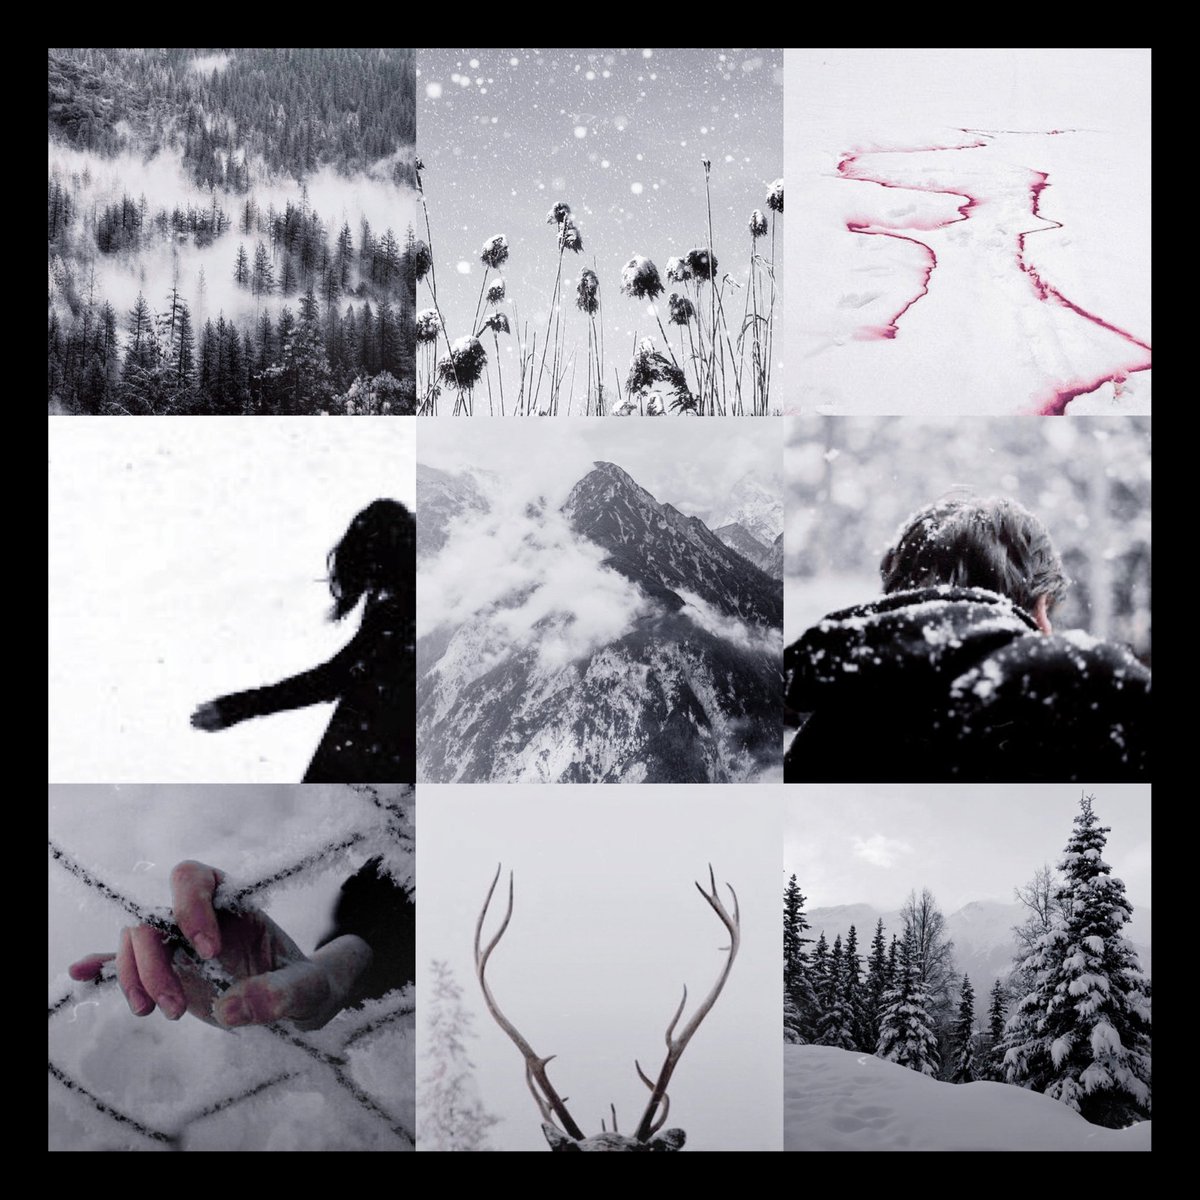 — 𝙬𝙞𝙣𝙩𝙚𝙧 𝙢𝙤𝙪𝙣𝙩𝙖𝙞𝙣𝙨- tributes are sent in wearing thin windbreakers, leggings, and winter boots but can be sponsored heavier gear.- cornucopia set on a steep hill- threats: goats, deer, avalanches, falling ice sickles.